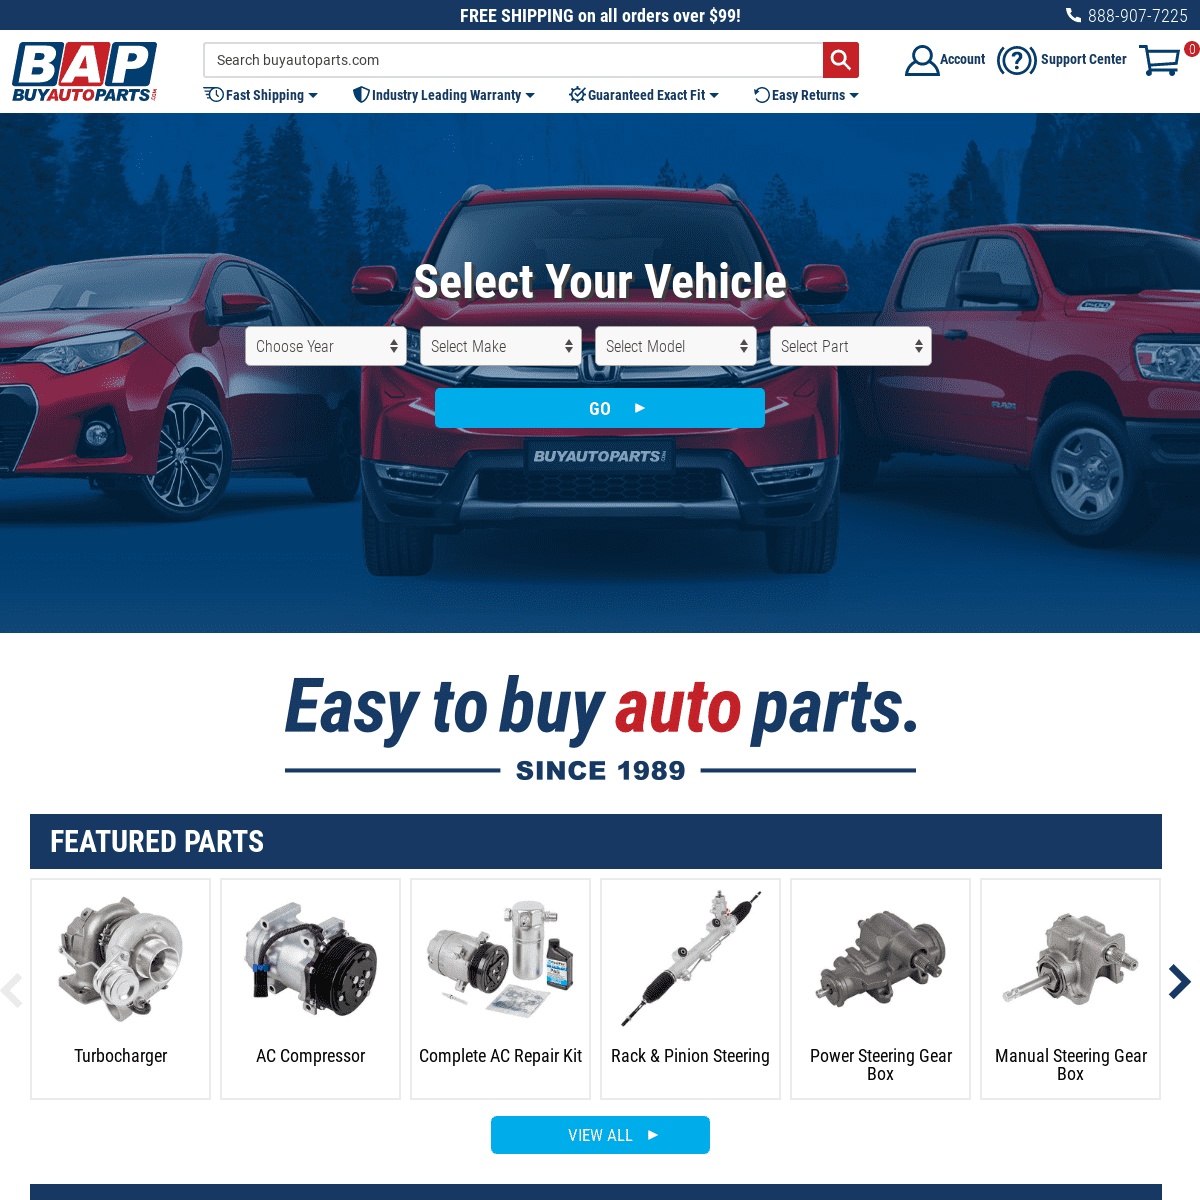 A complete backup of https://buyautoparts.com